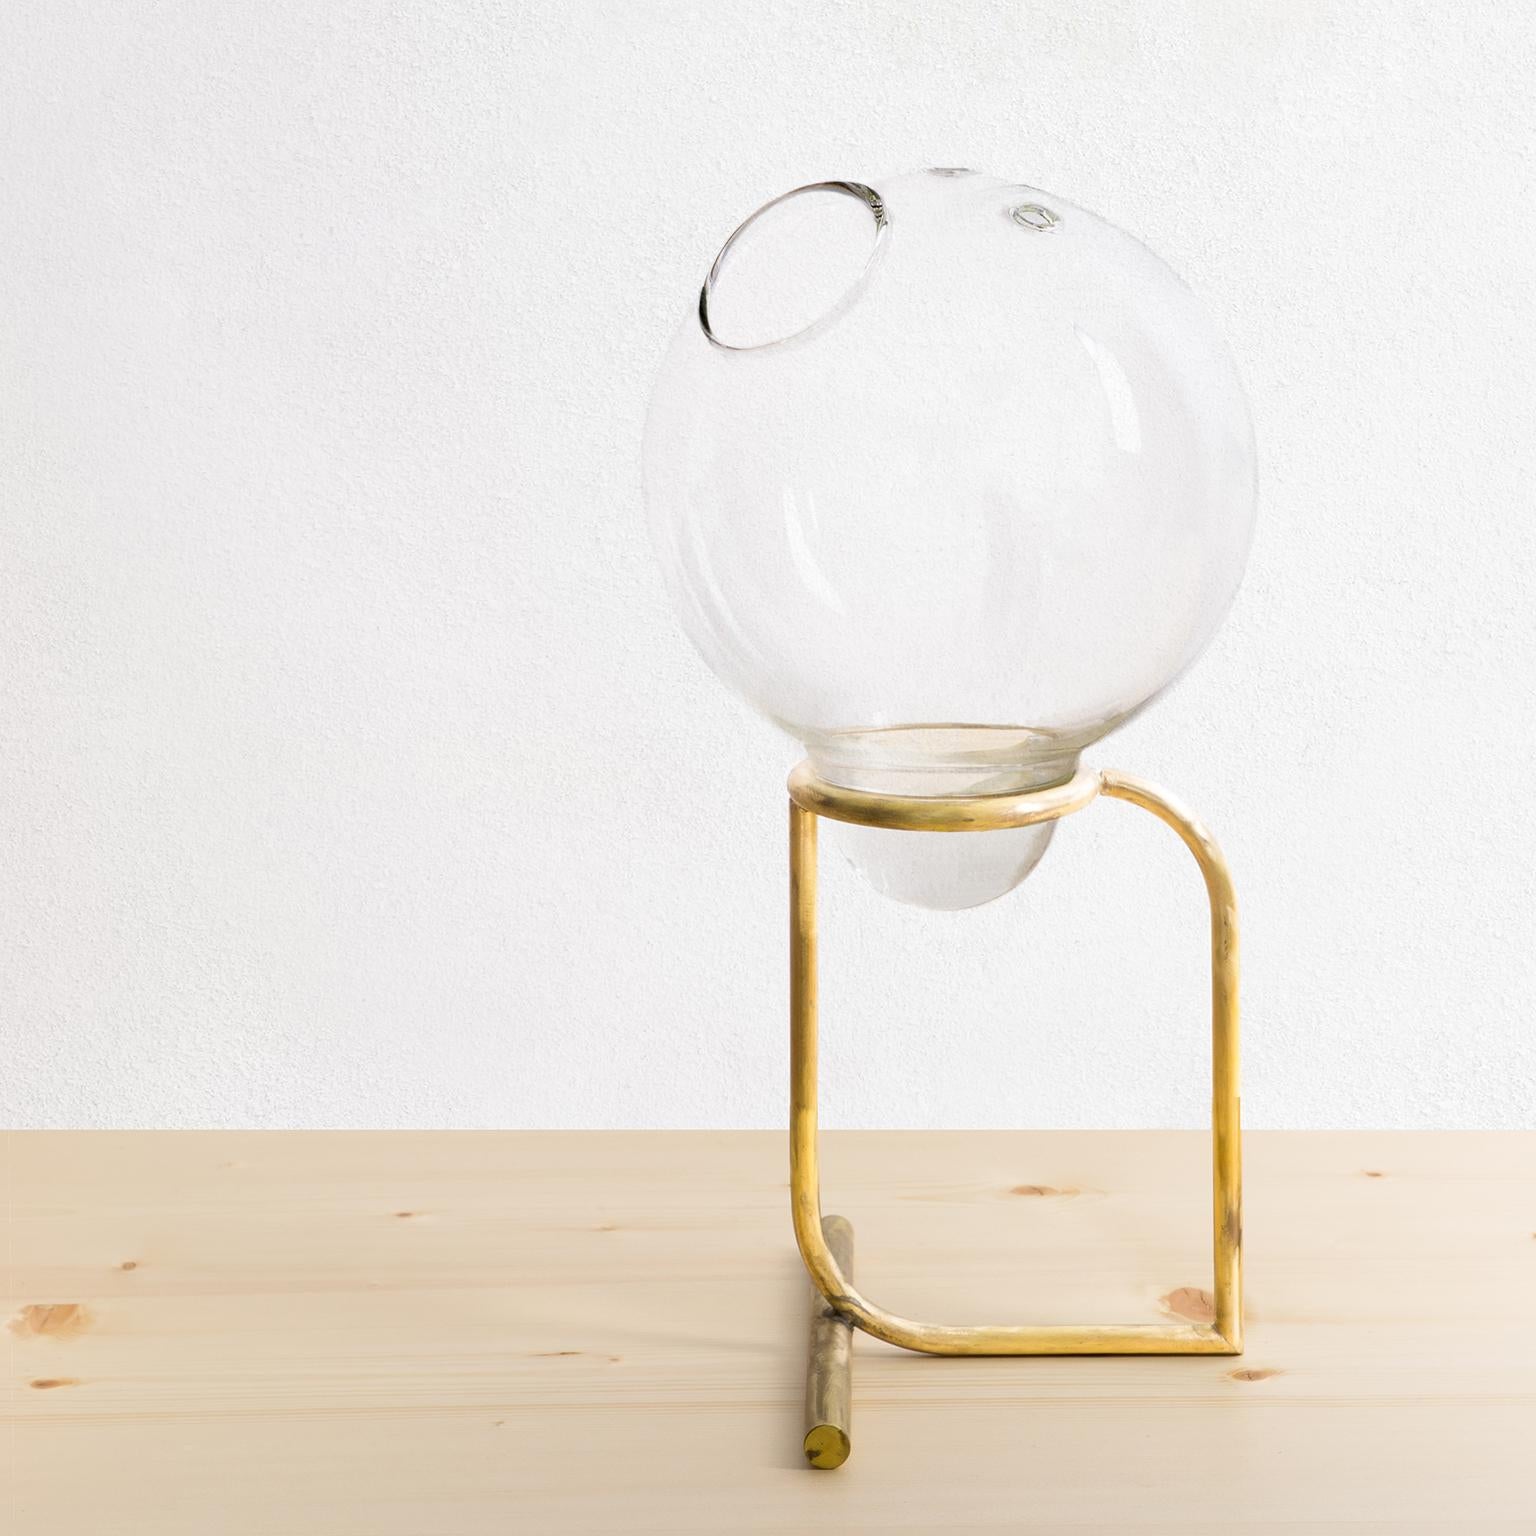 The “Fugu” vase is part of the project Ikebana for beginners, it is the translation of a concept that wants to confuse the limits of the function of a product with the emotional freedom generated by the user’s involvement. This is how objects that